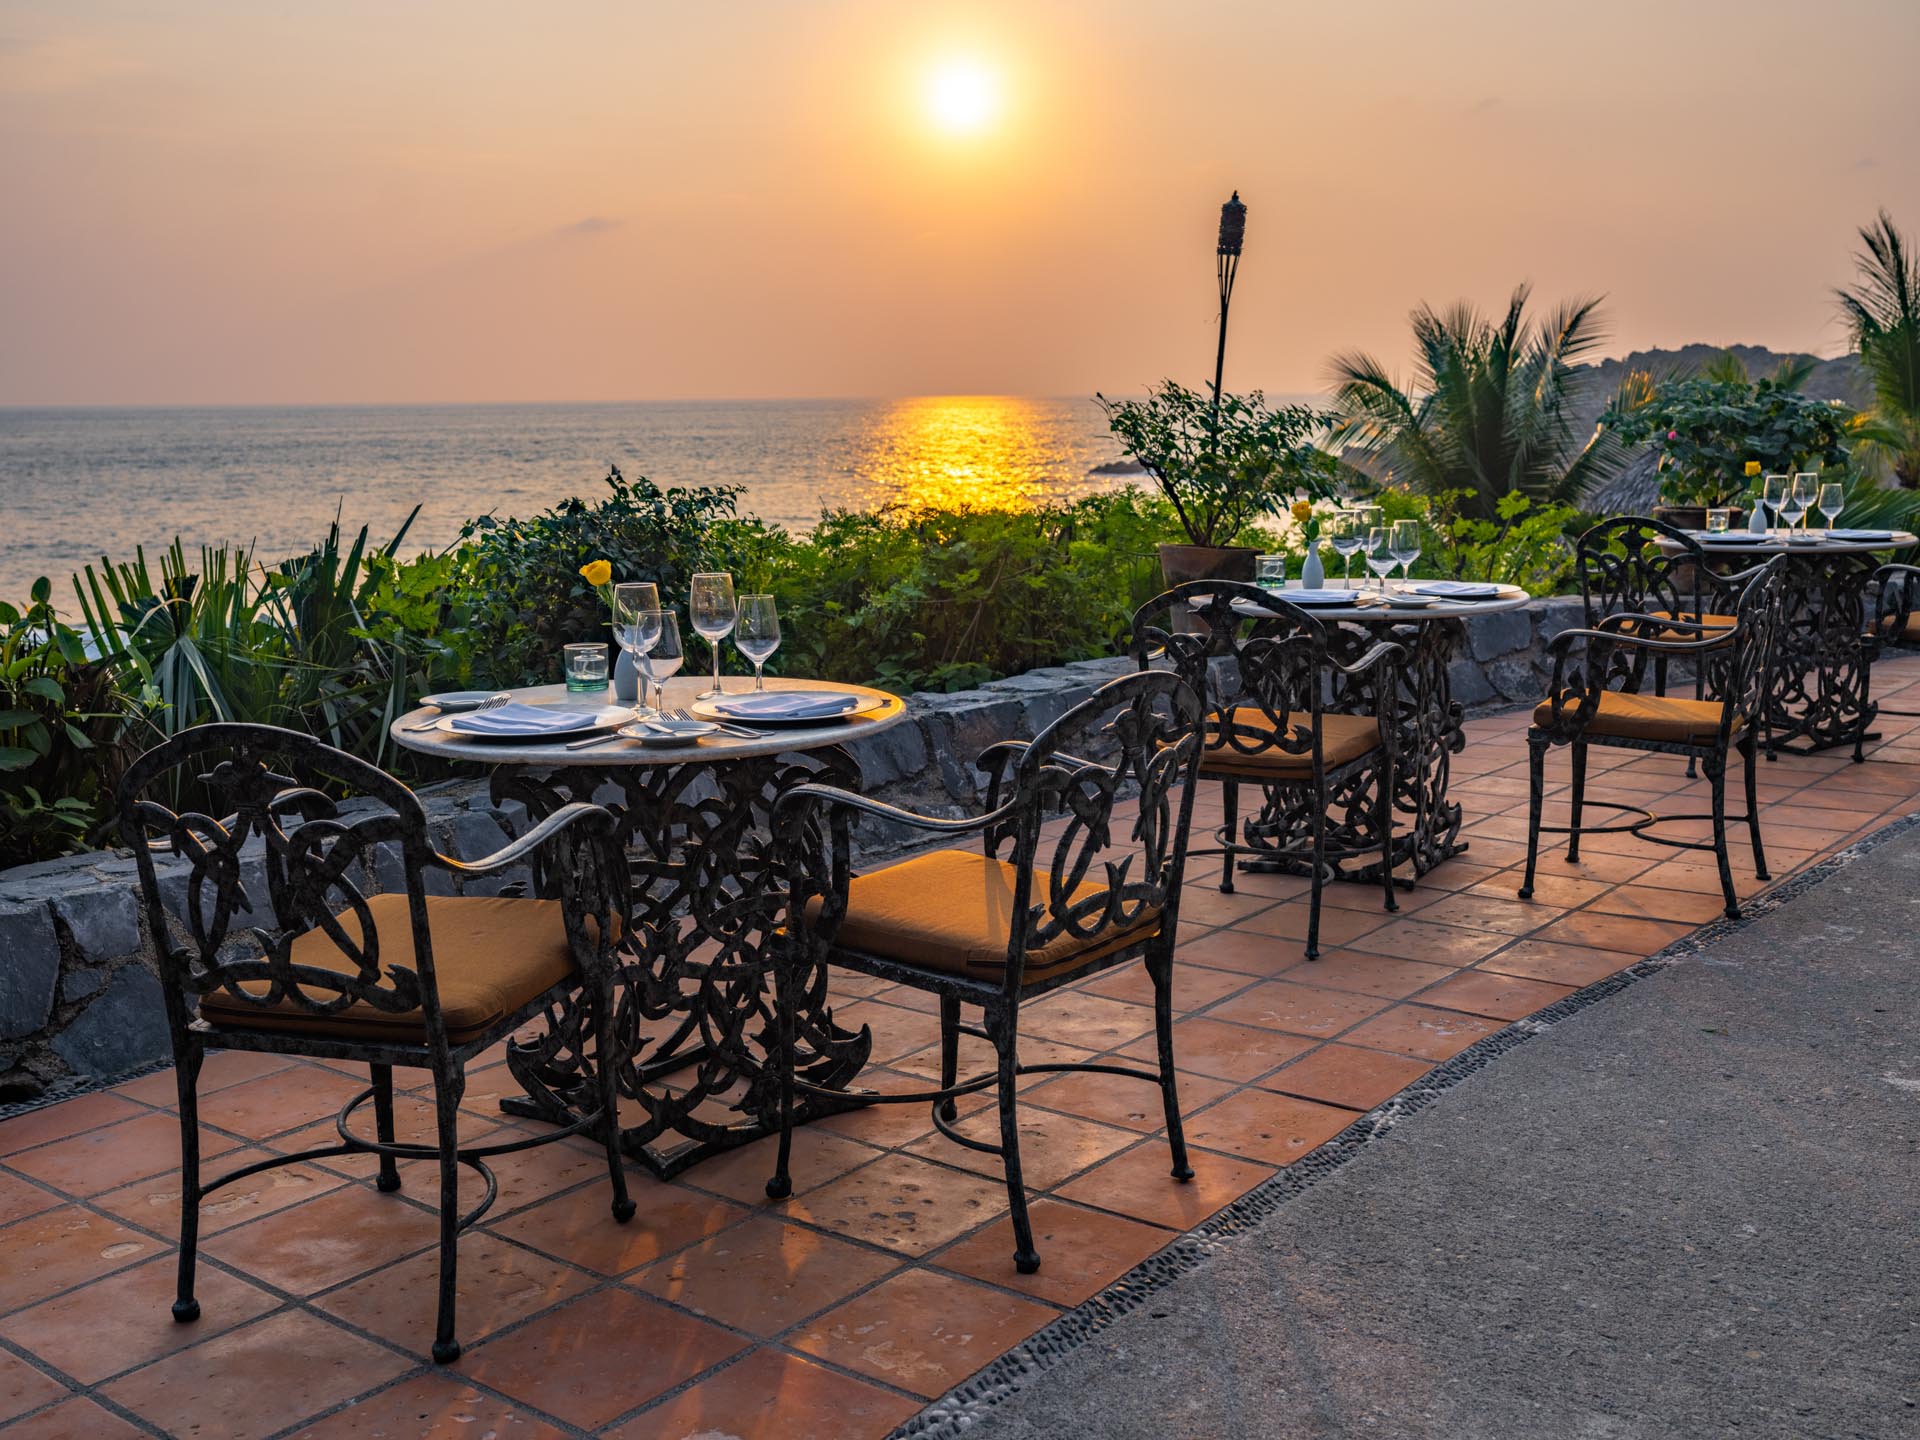 Outdoor dining at sunset